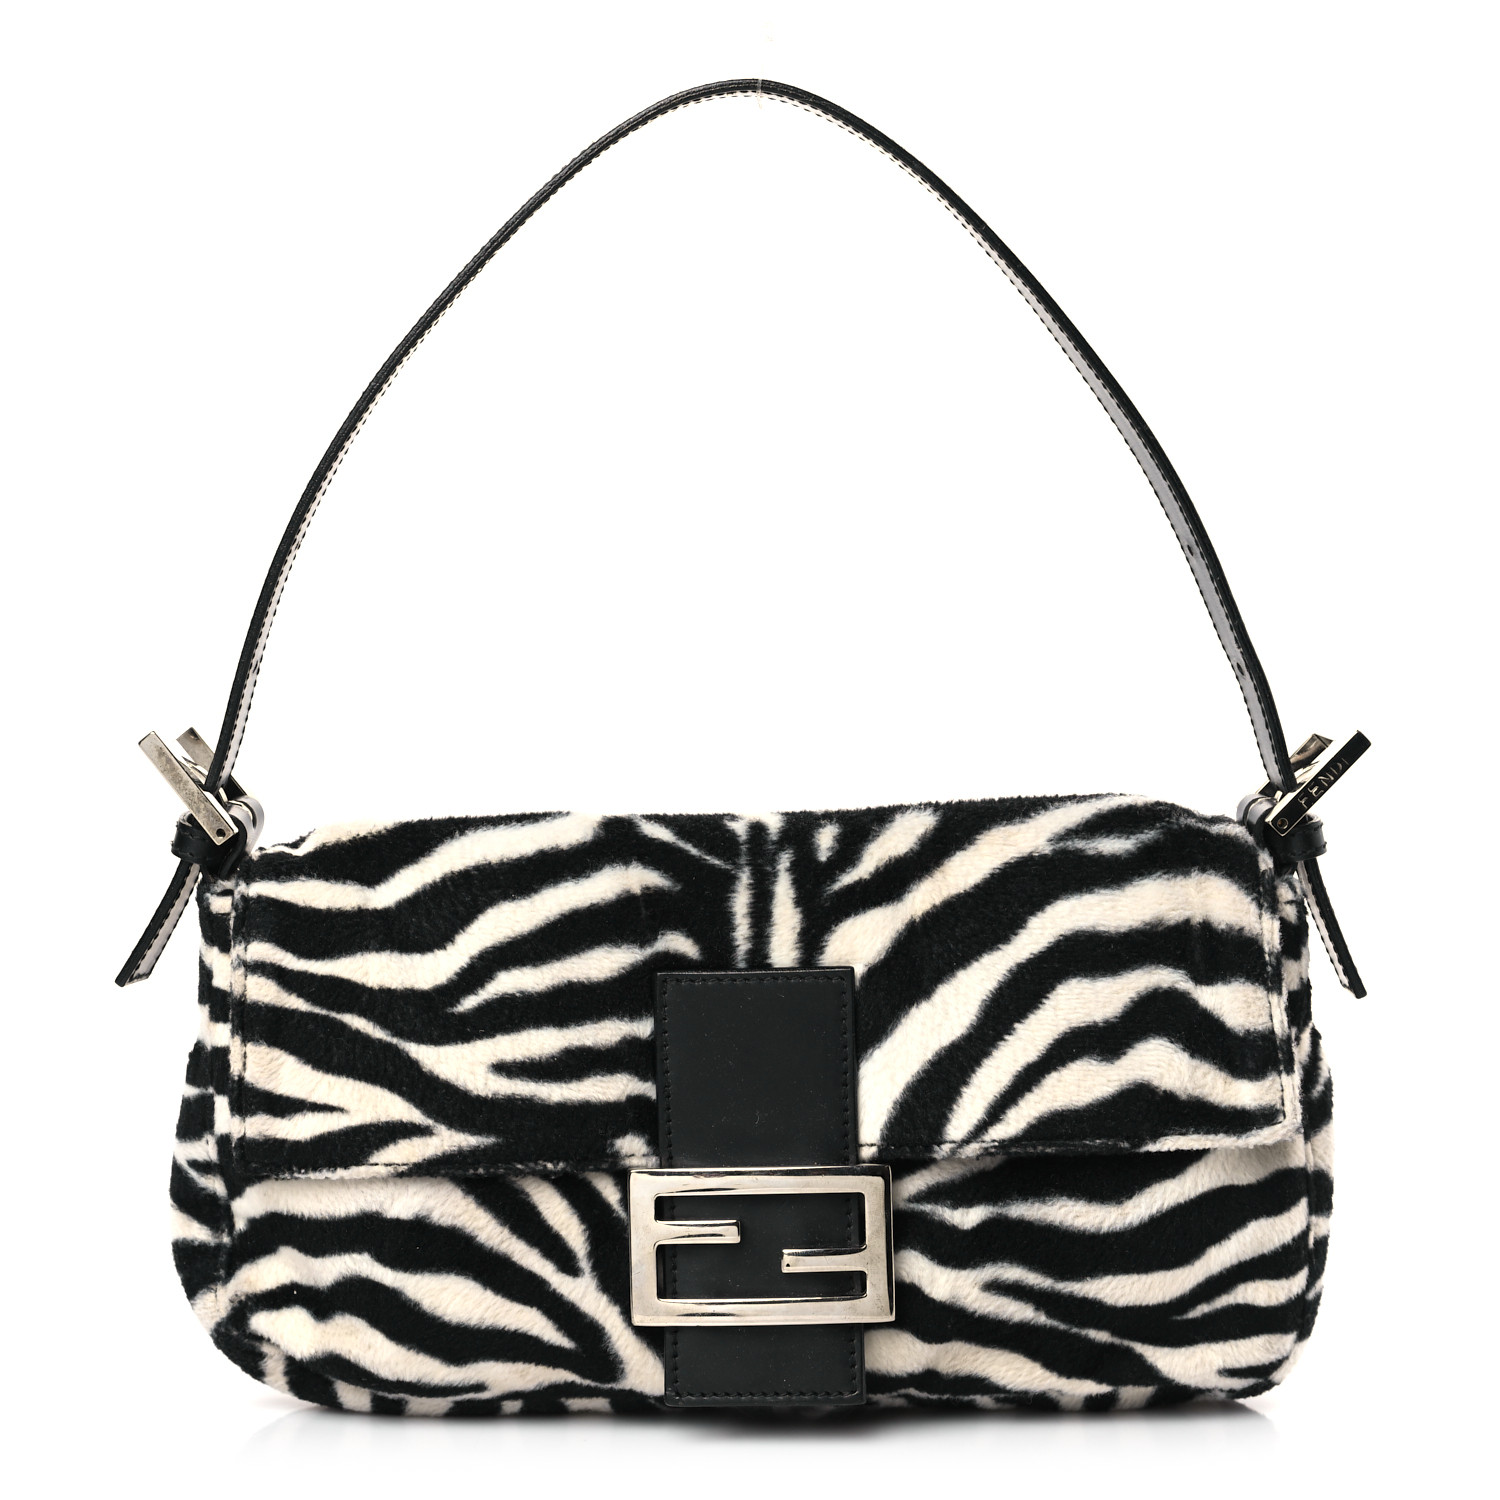 image of FENDI Zebra Print Baguette in the colors Black and White by FASHIONPHILE